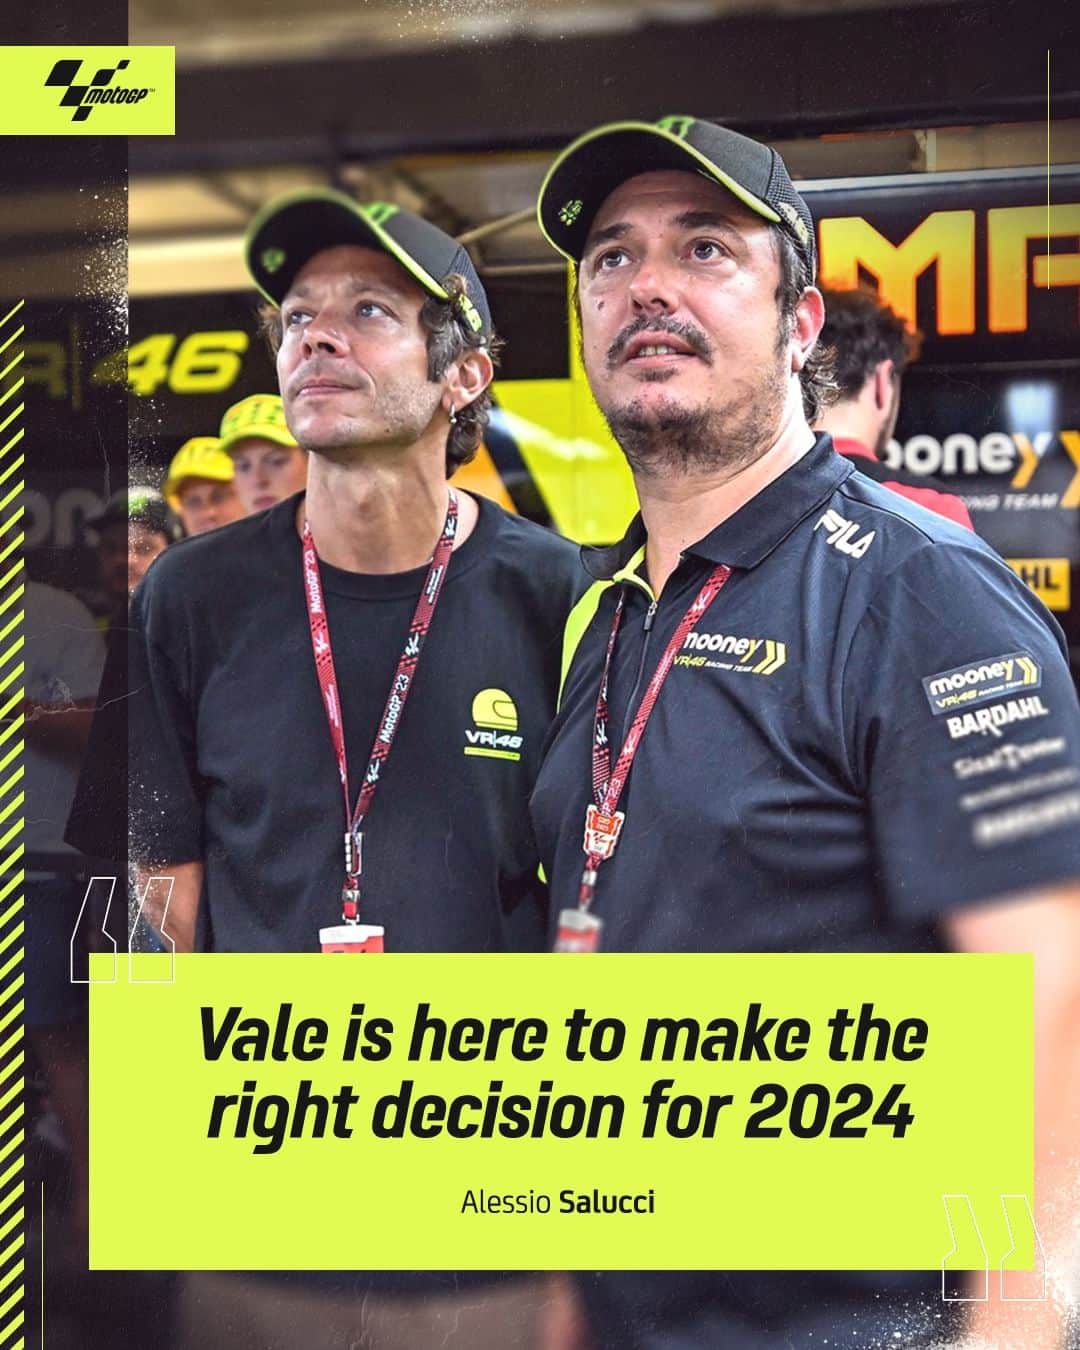 MotoGPのインスタグラム：「@valeyellow46 is in Valencia as he has an important decision to make! 👀 @vr46racingteam's big boss will have the final say on who will be @marcobez72 teammate next season! 🔜   #ValenciaGP 🏁 #MotoGP #Motorsport #Motorcycle #Racing」